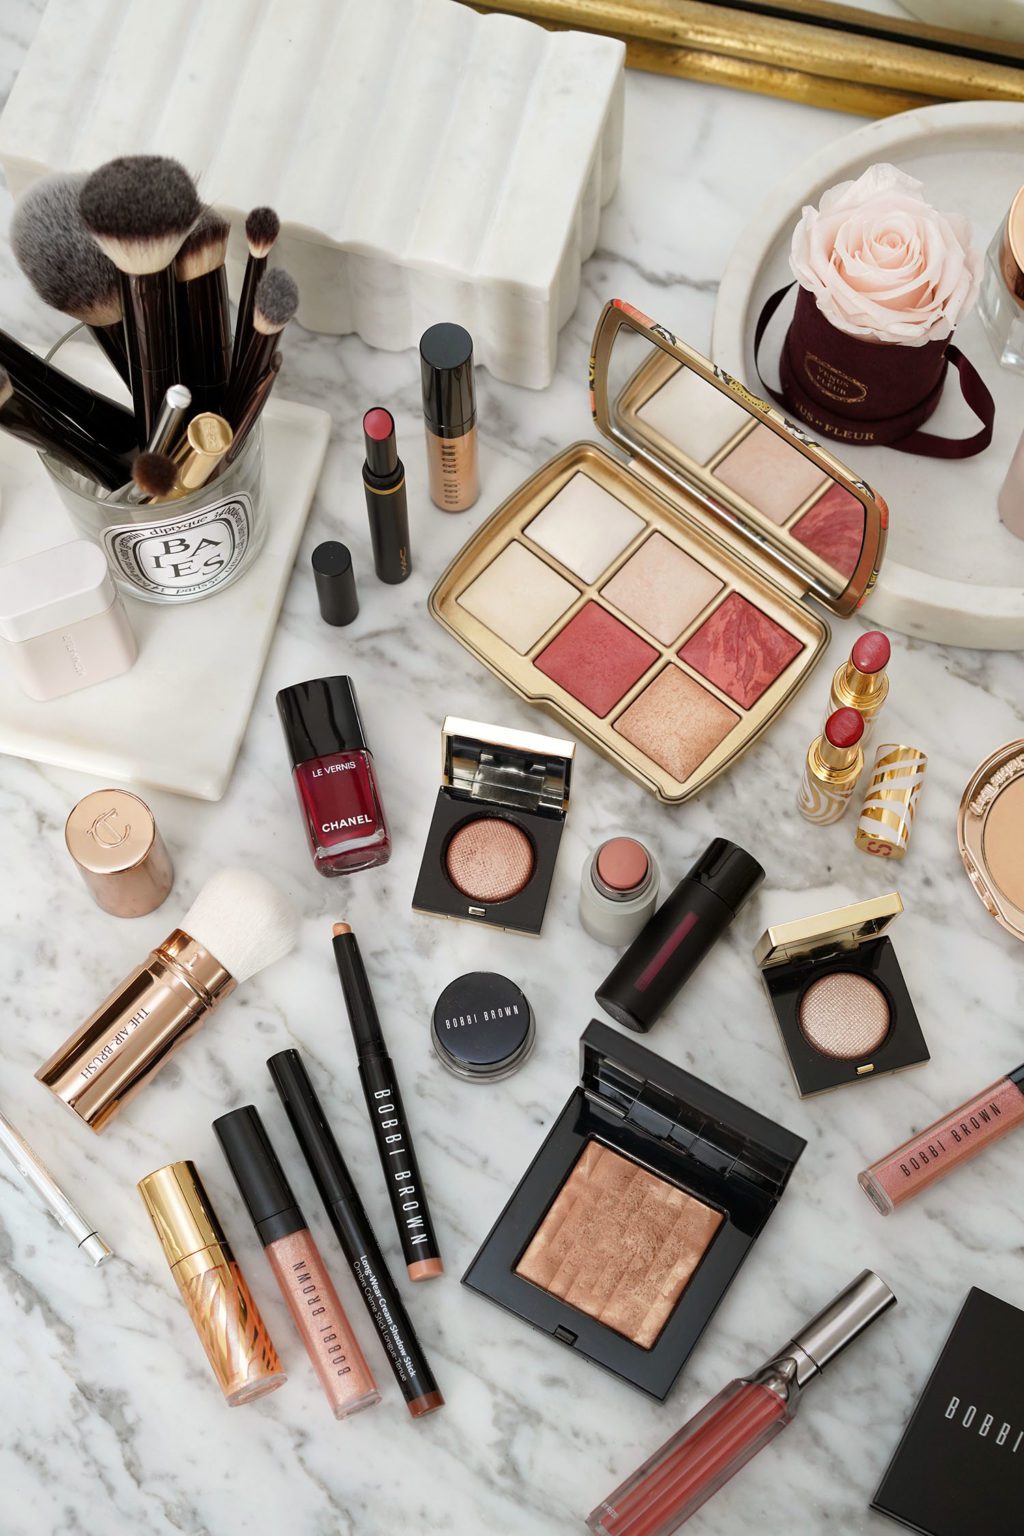 Holiday Makeup Looks I’m Loving Right Now - The Beauty Look Book